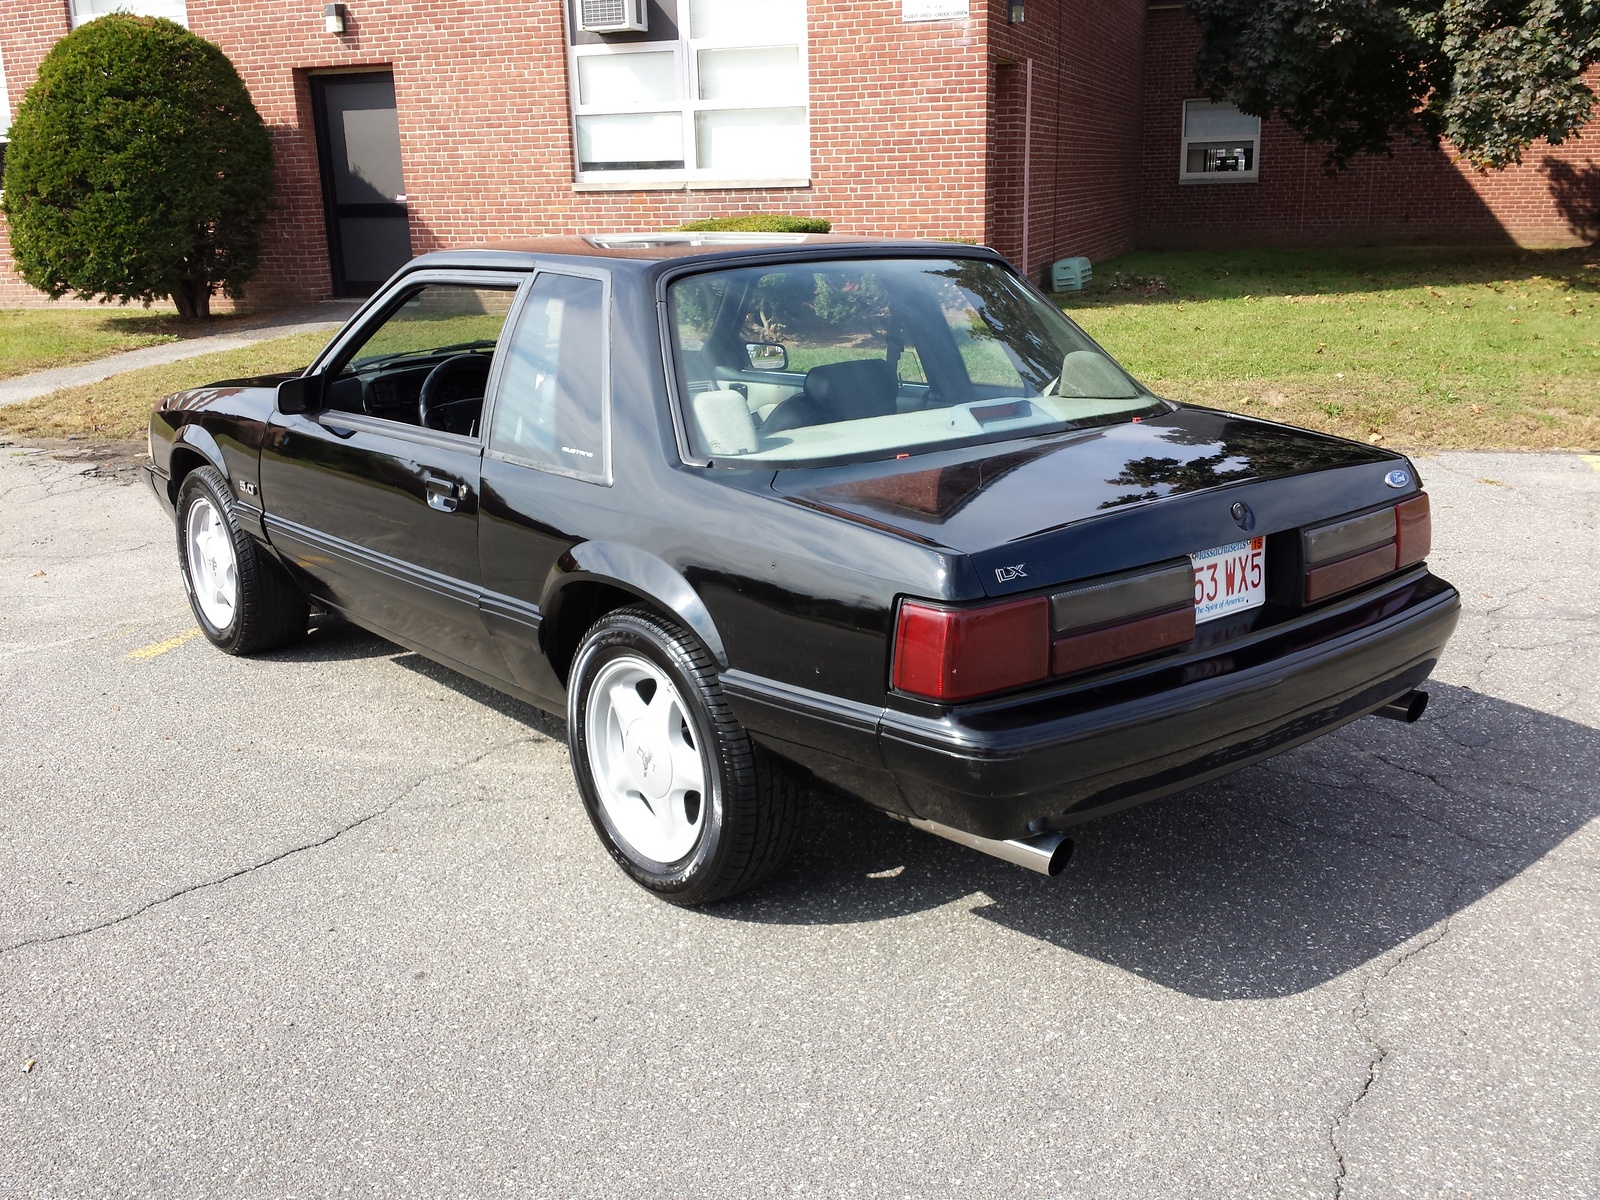 1991 Ford mustang lx 5.0 specs #5